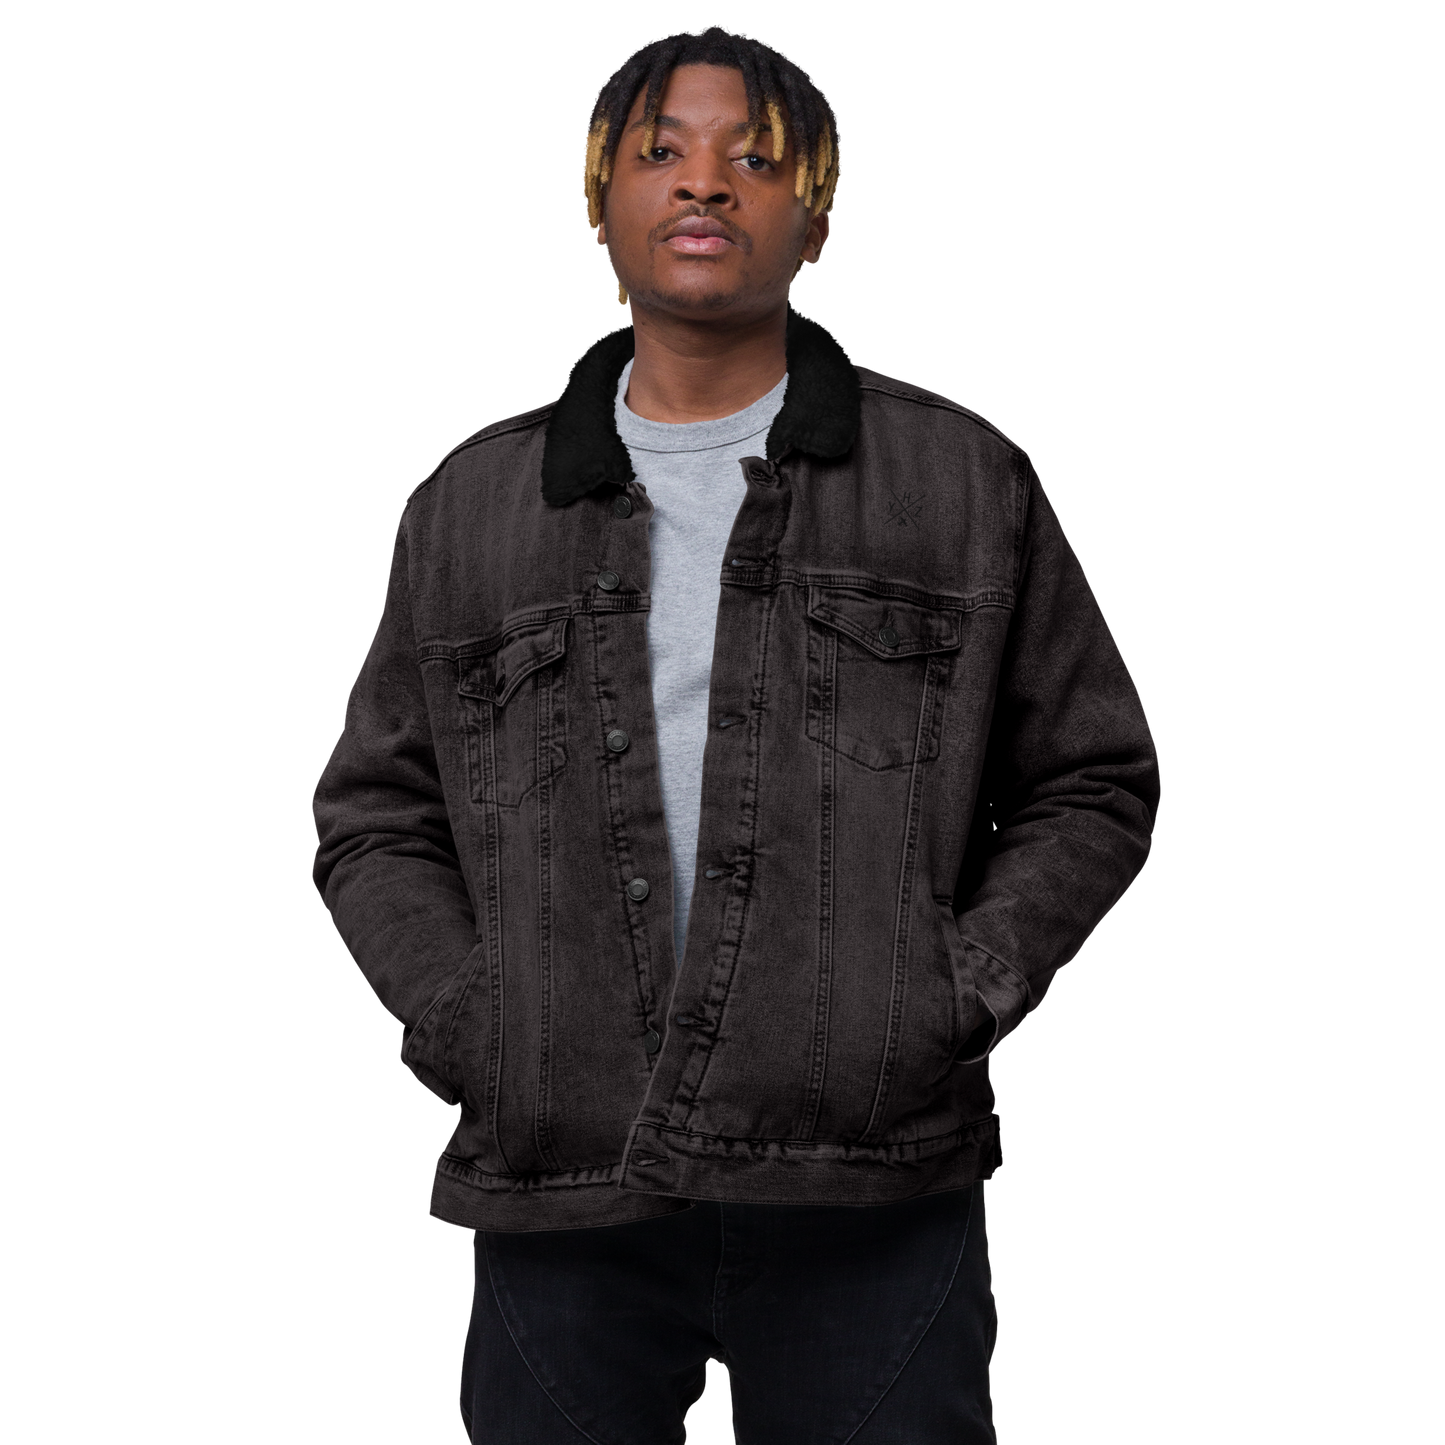 YHM Designs - YHZ Halifax Denim Sherpa Jacket - Crossed-X Design with Airport Code and Vintage Propliner - Black & White Embroidery - Image 01